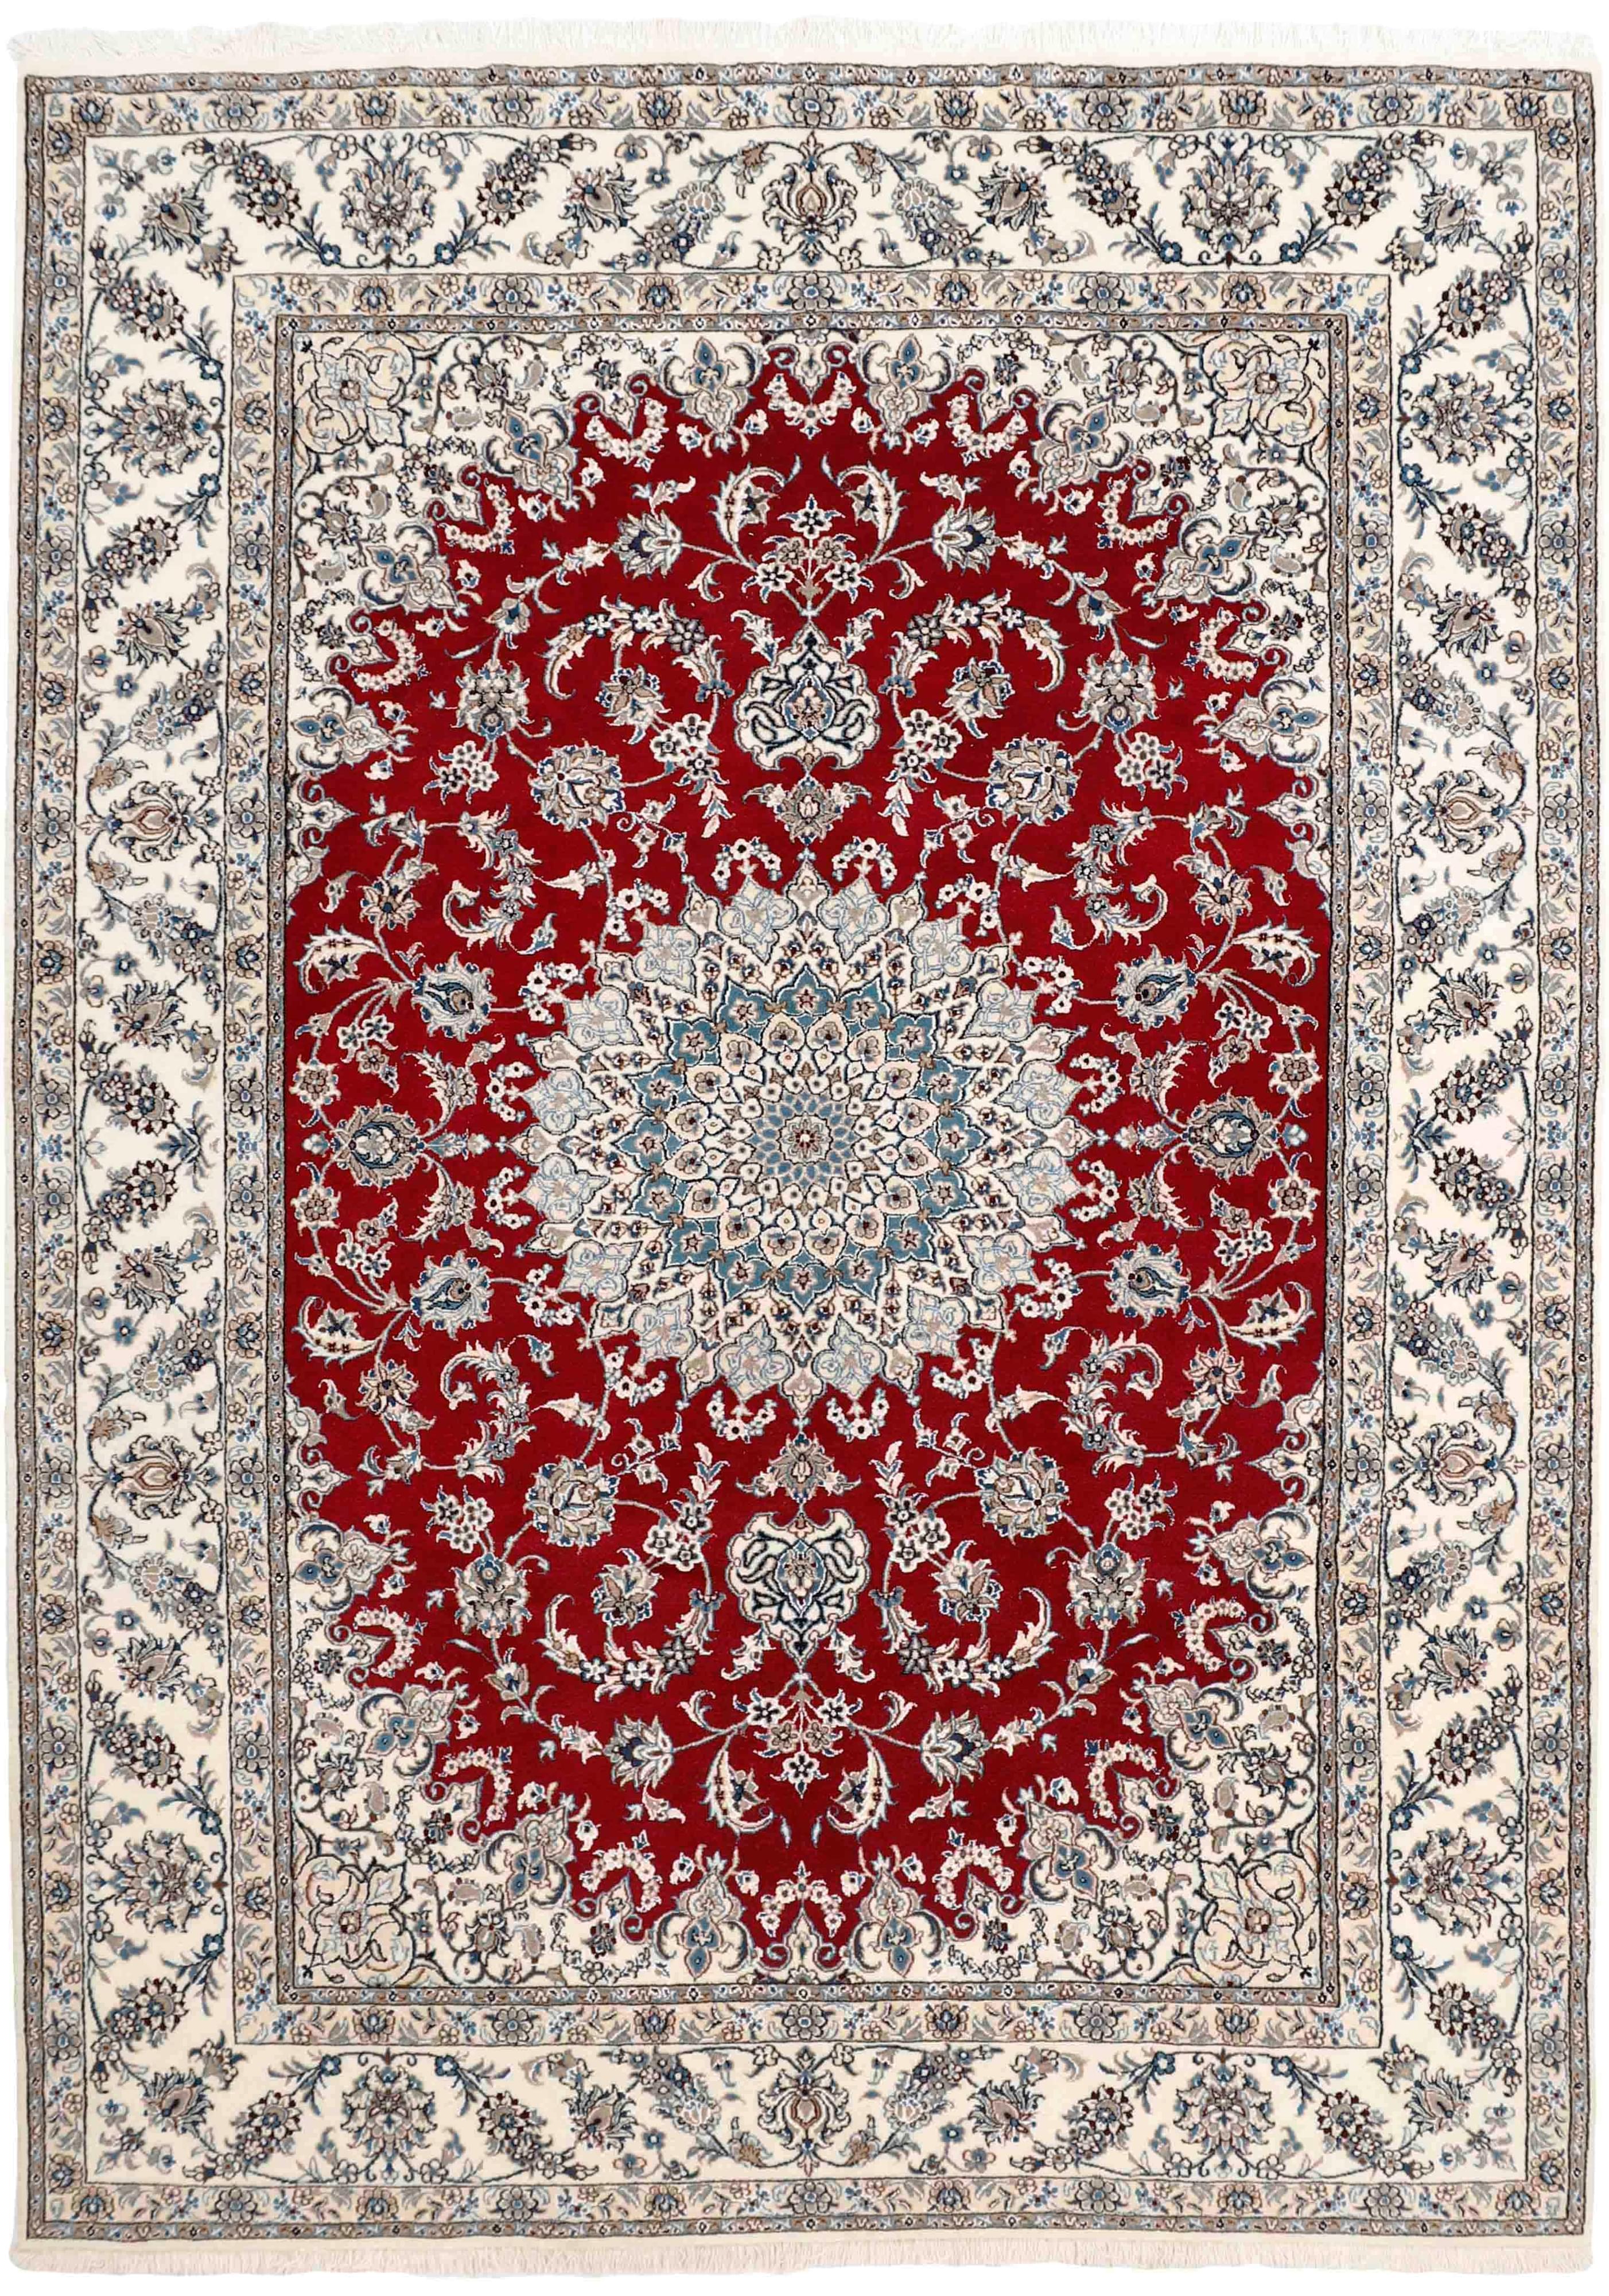 Authentic persian rug with a traditional floral design in red, cream and blue